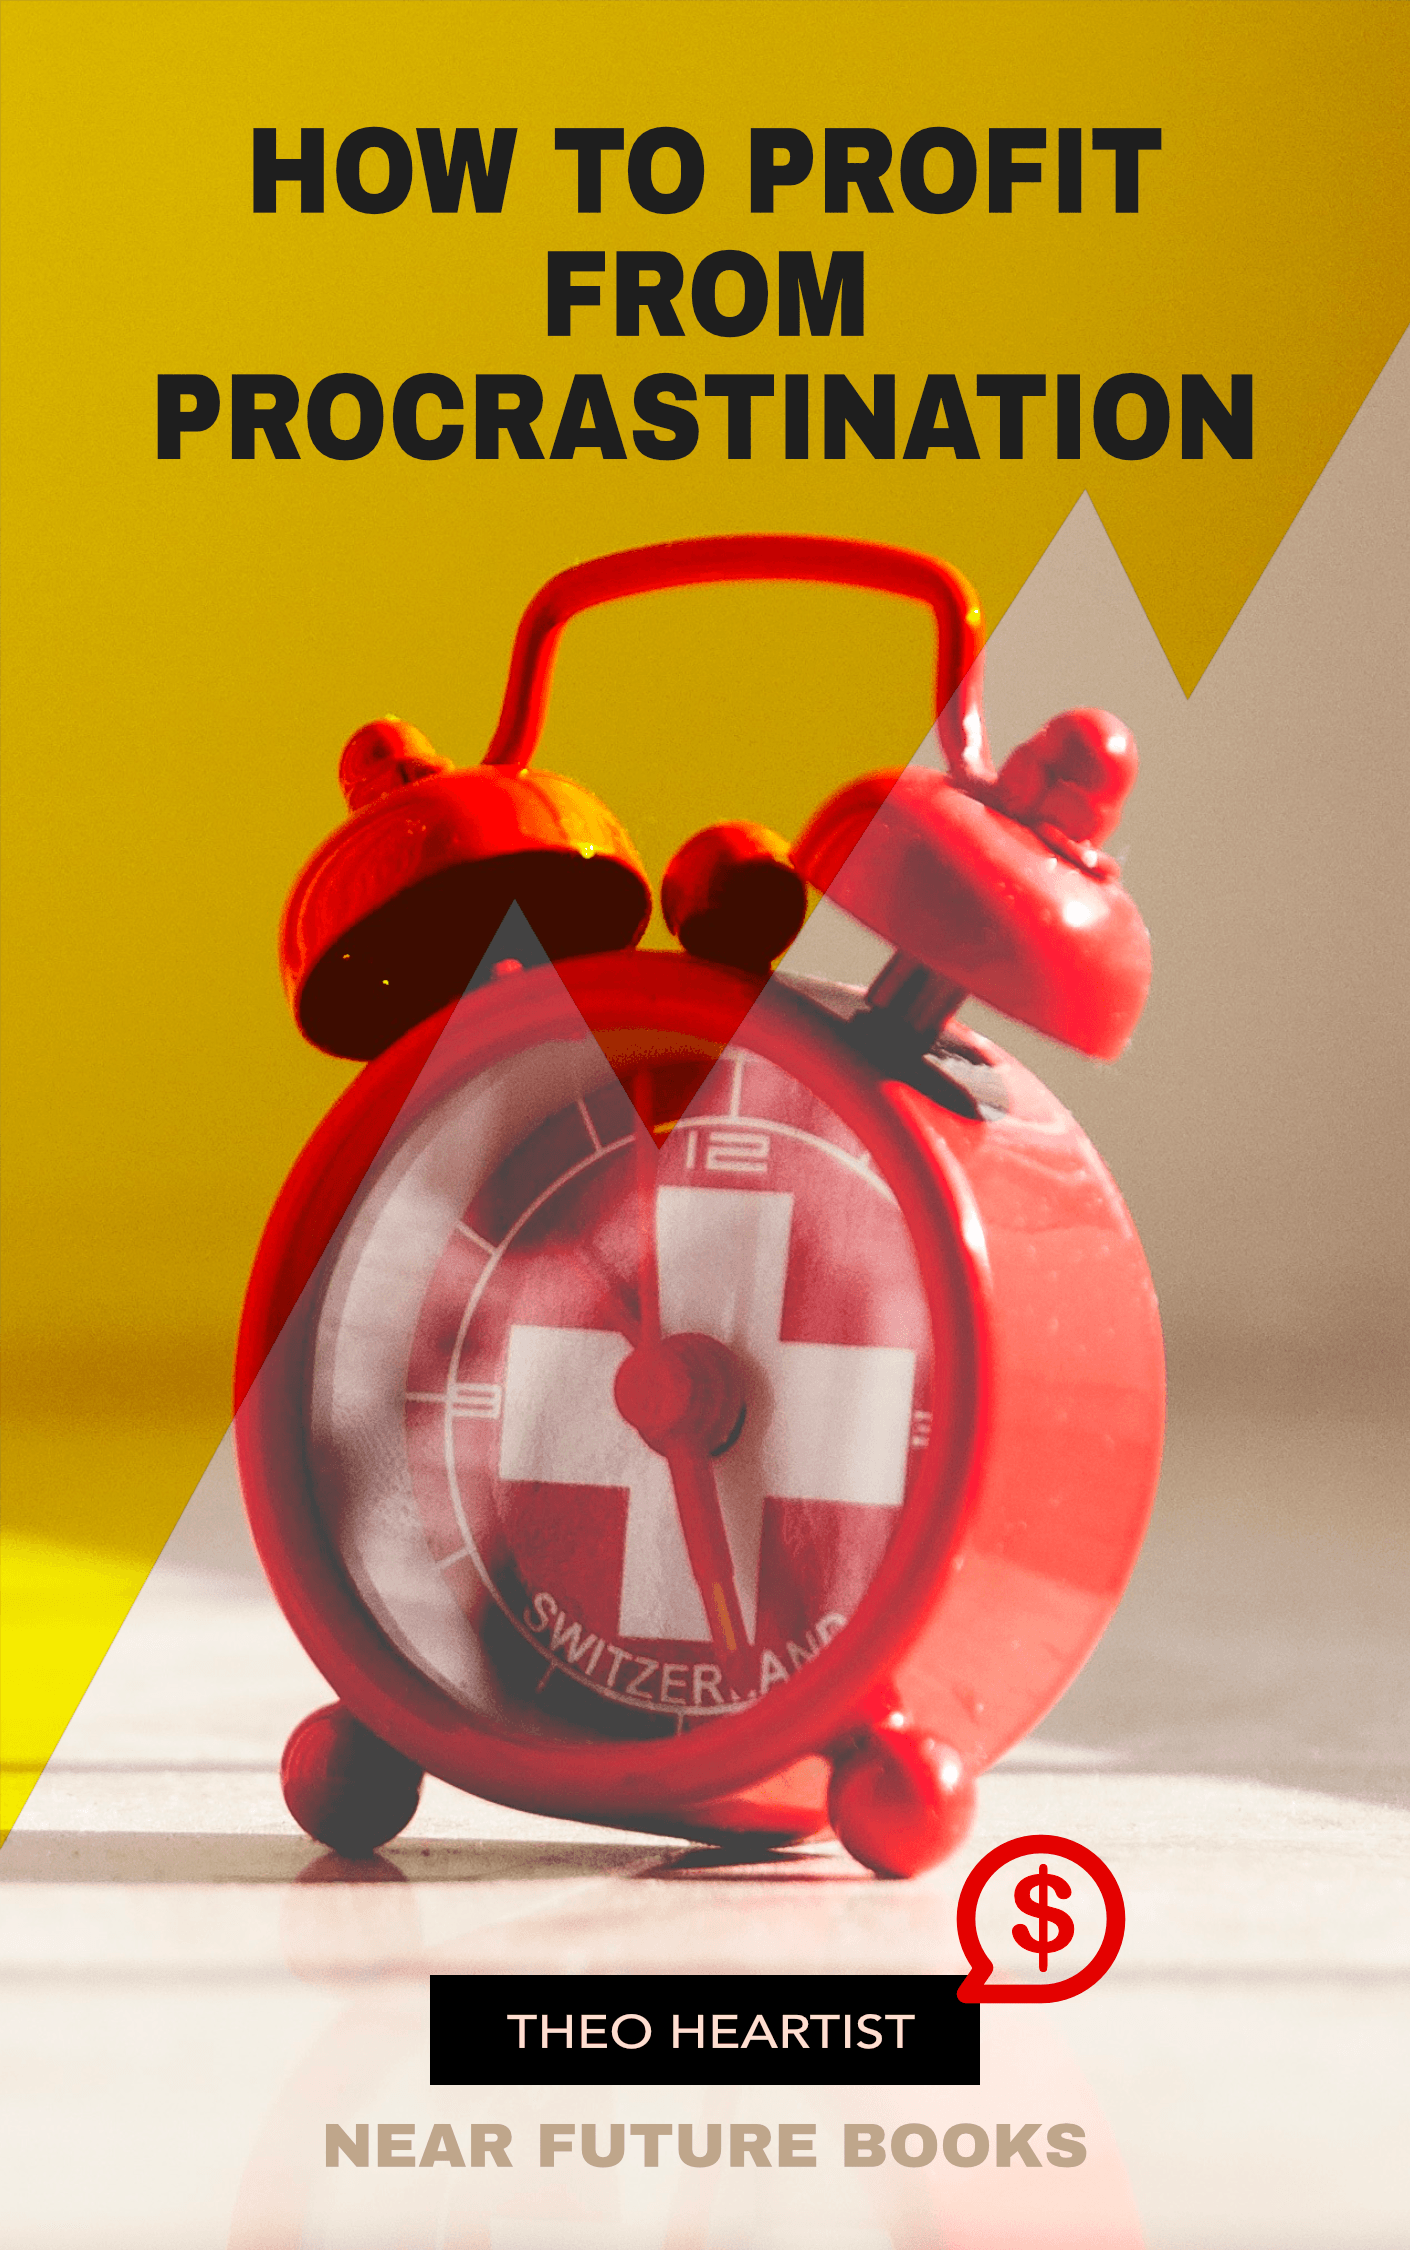 How to Profit from Procrastination